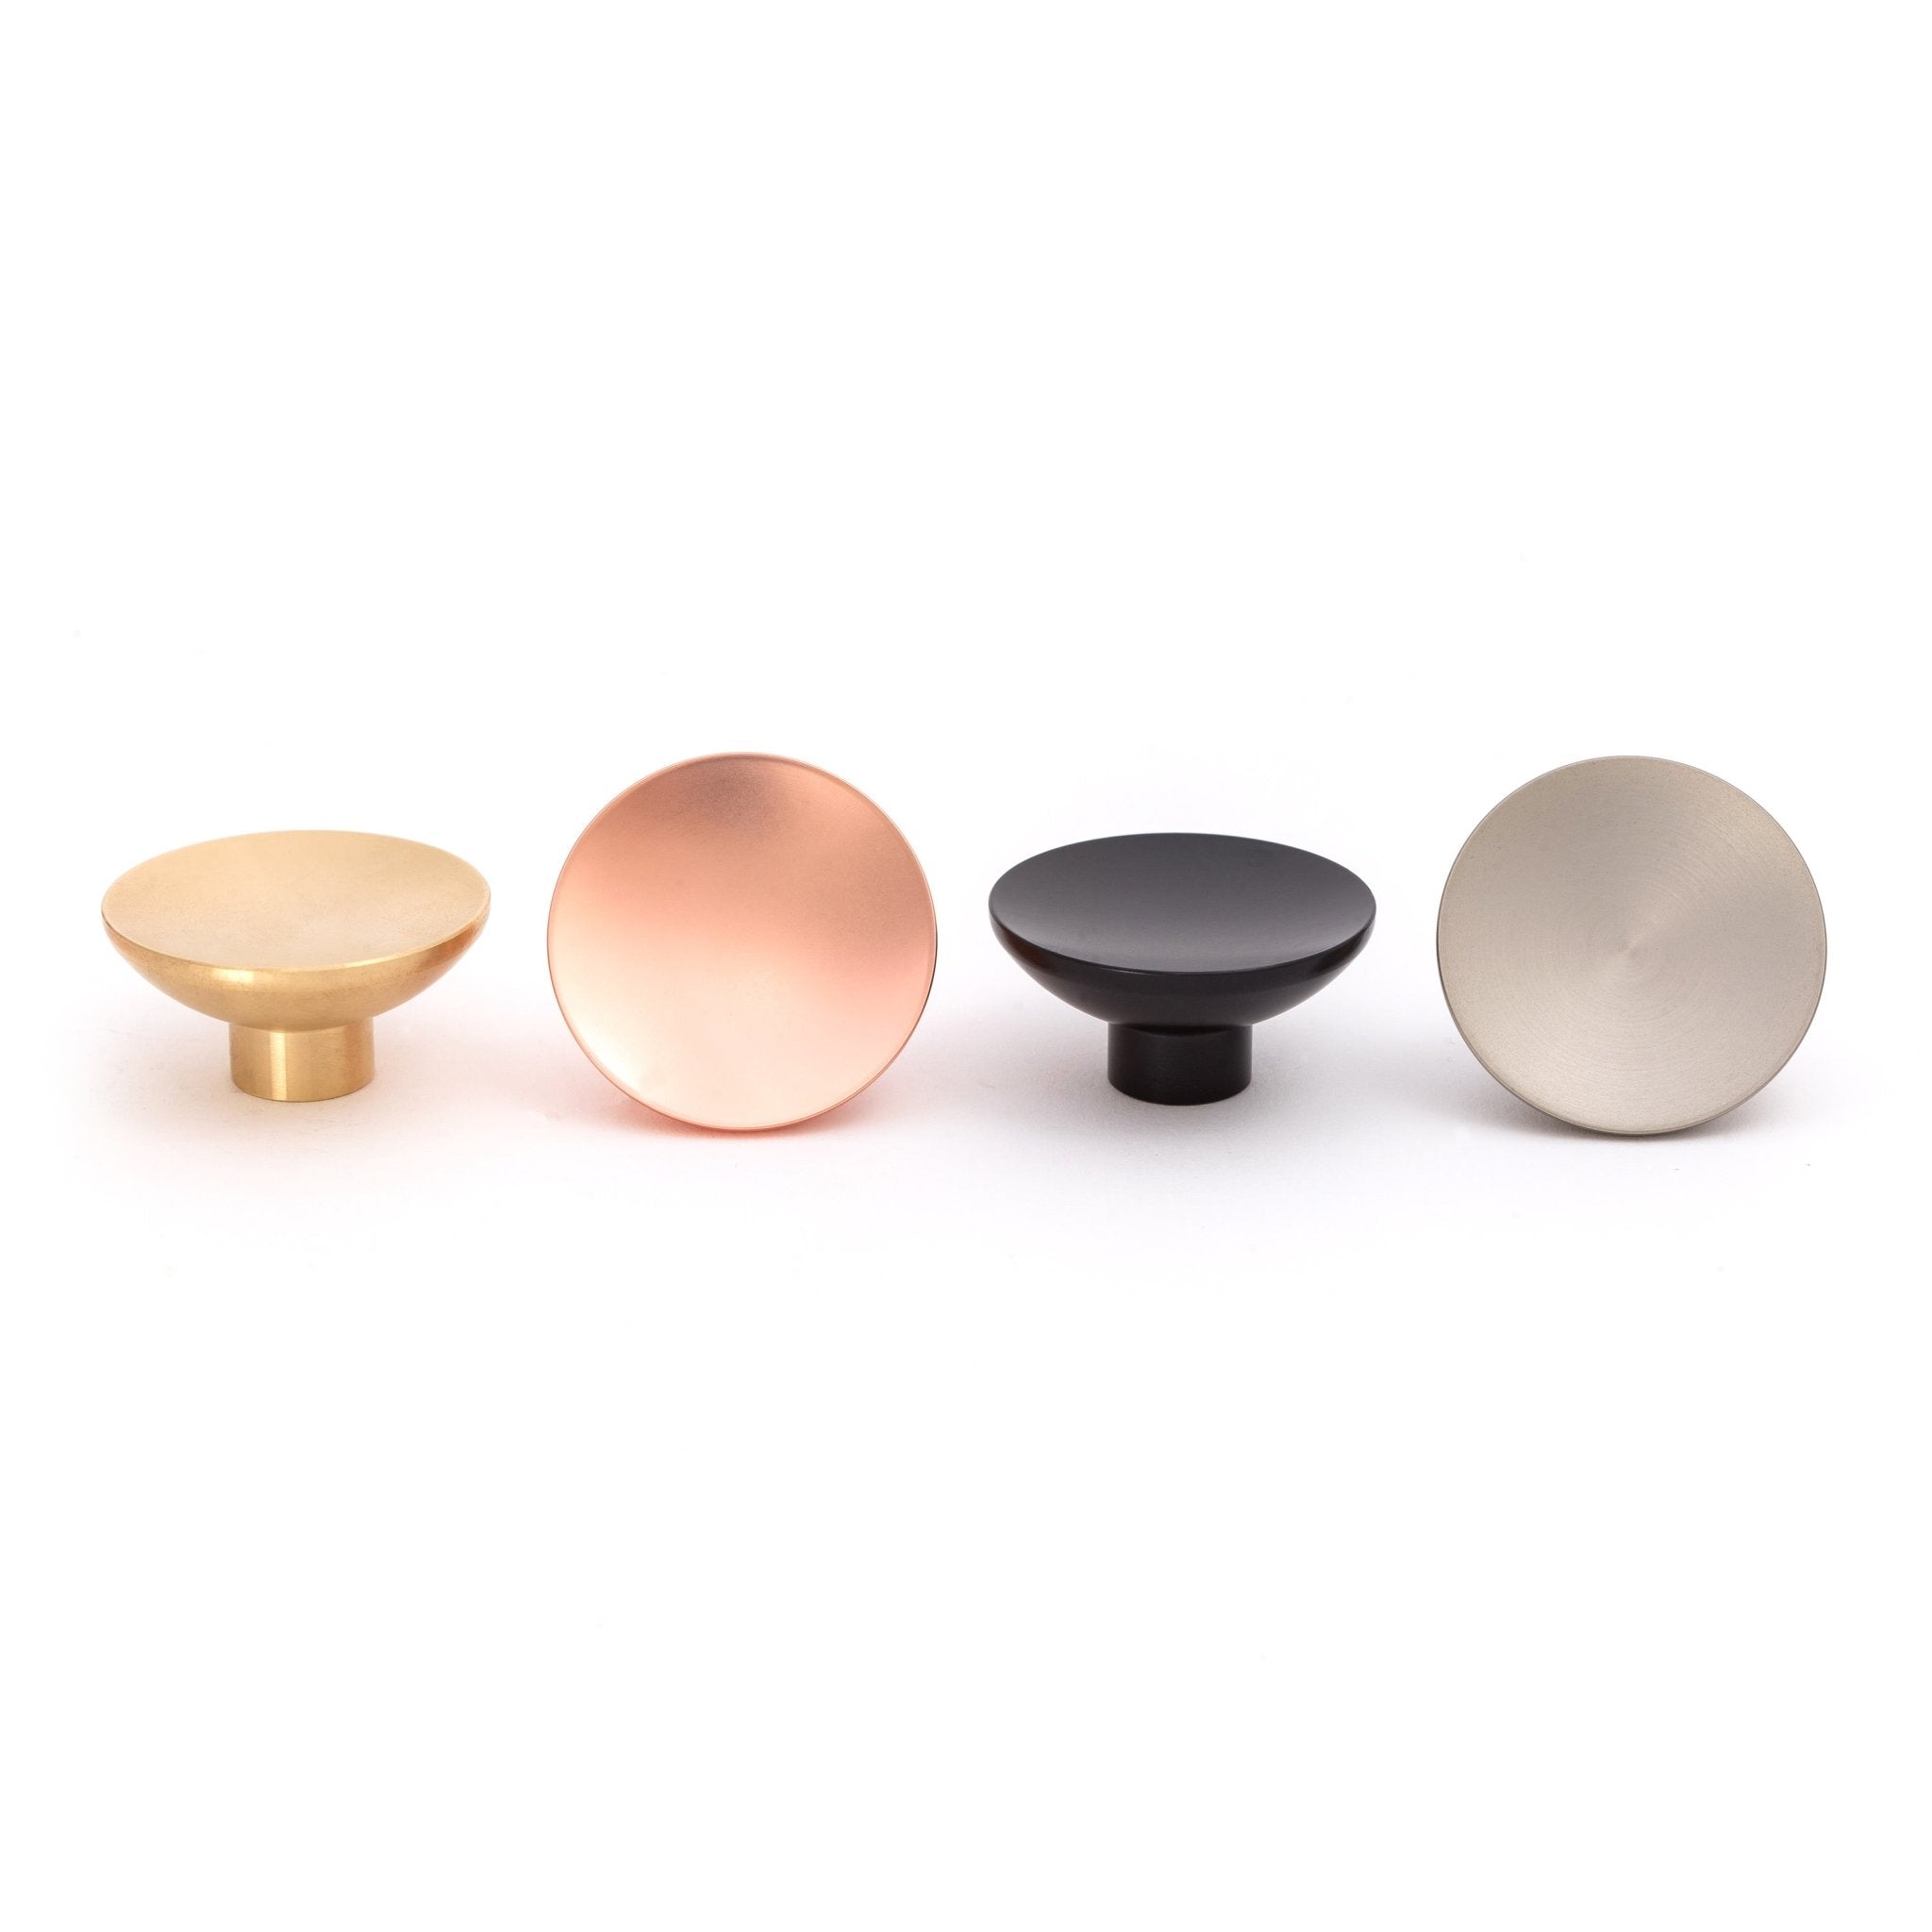 Bowl 40mm Knob-Brushed Brass--The Hairpin Leg Co.